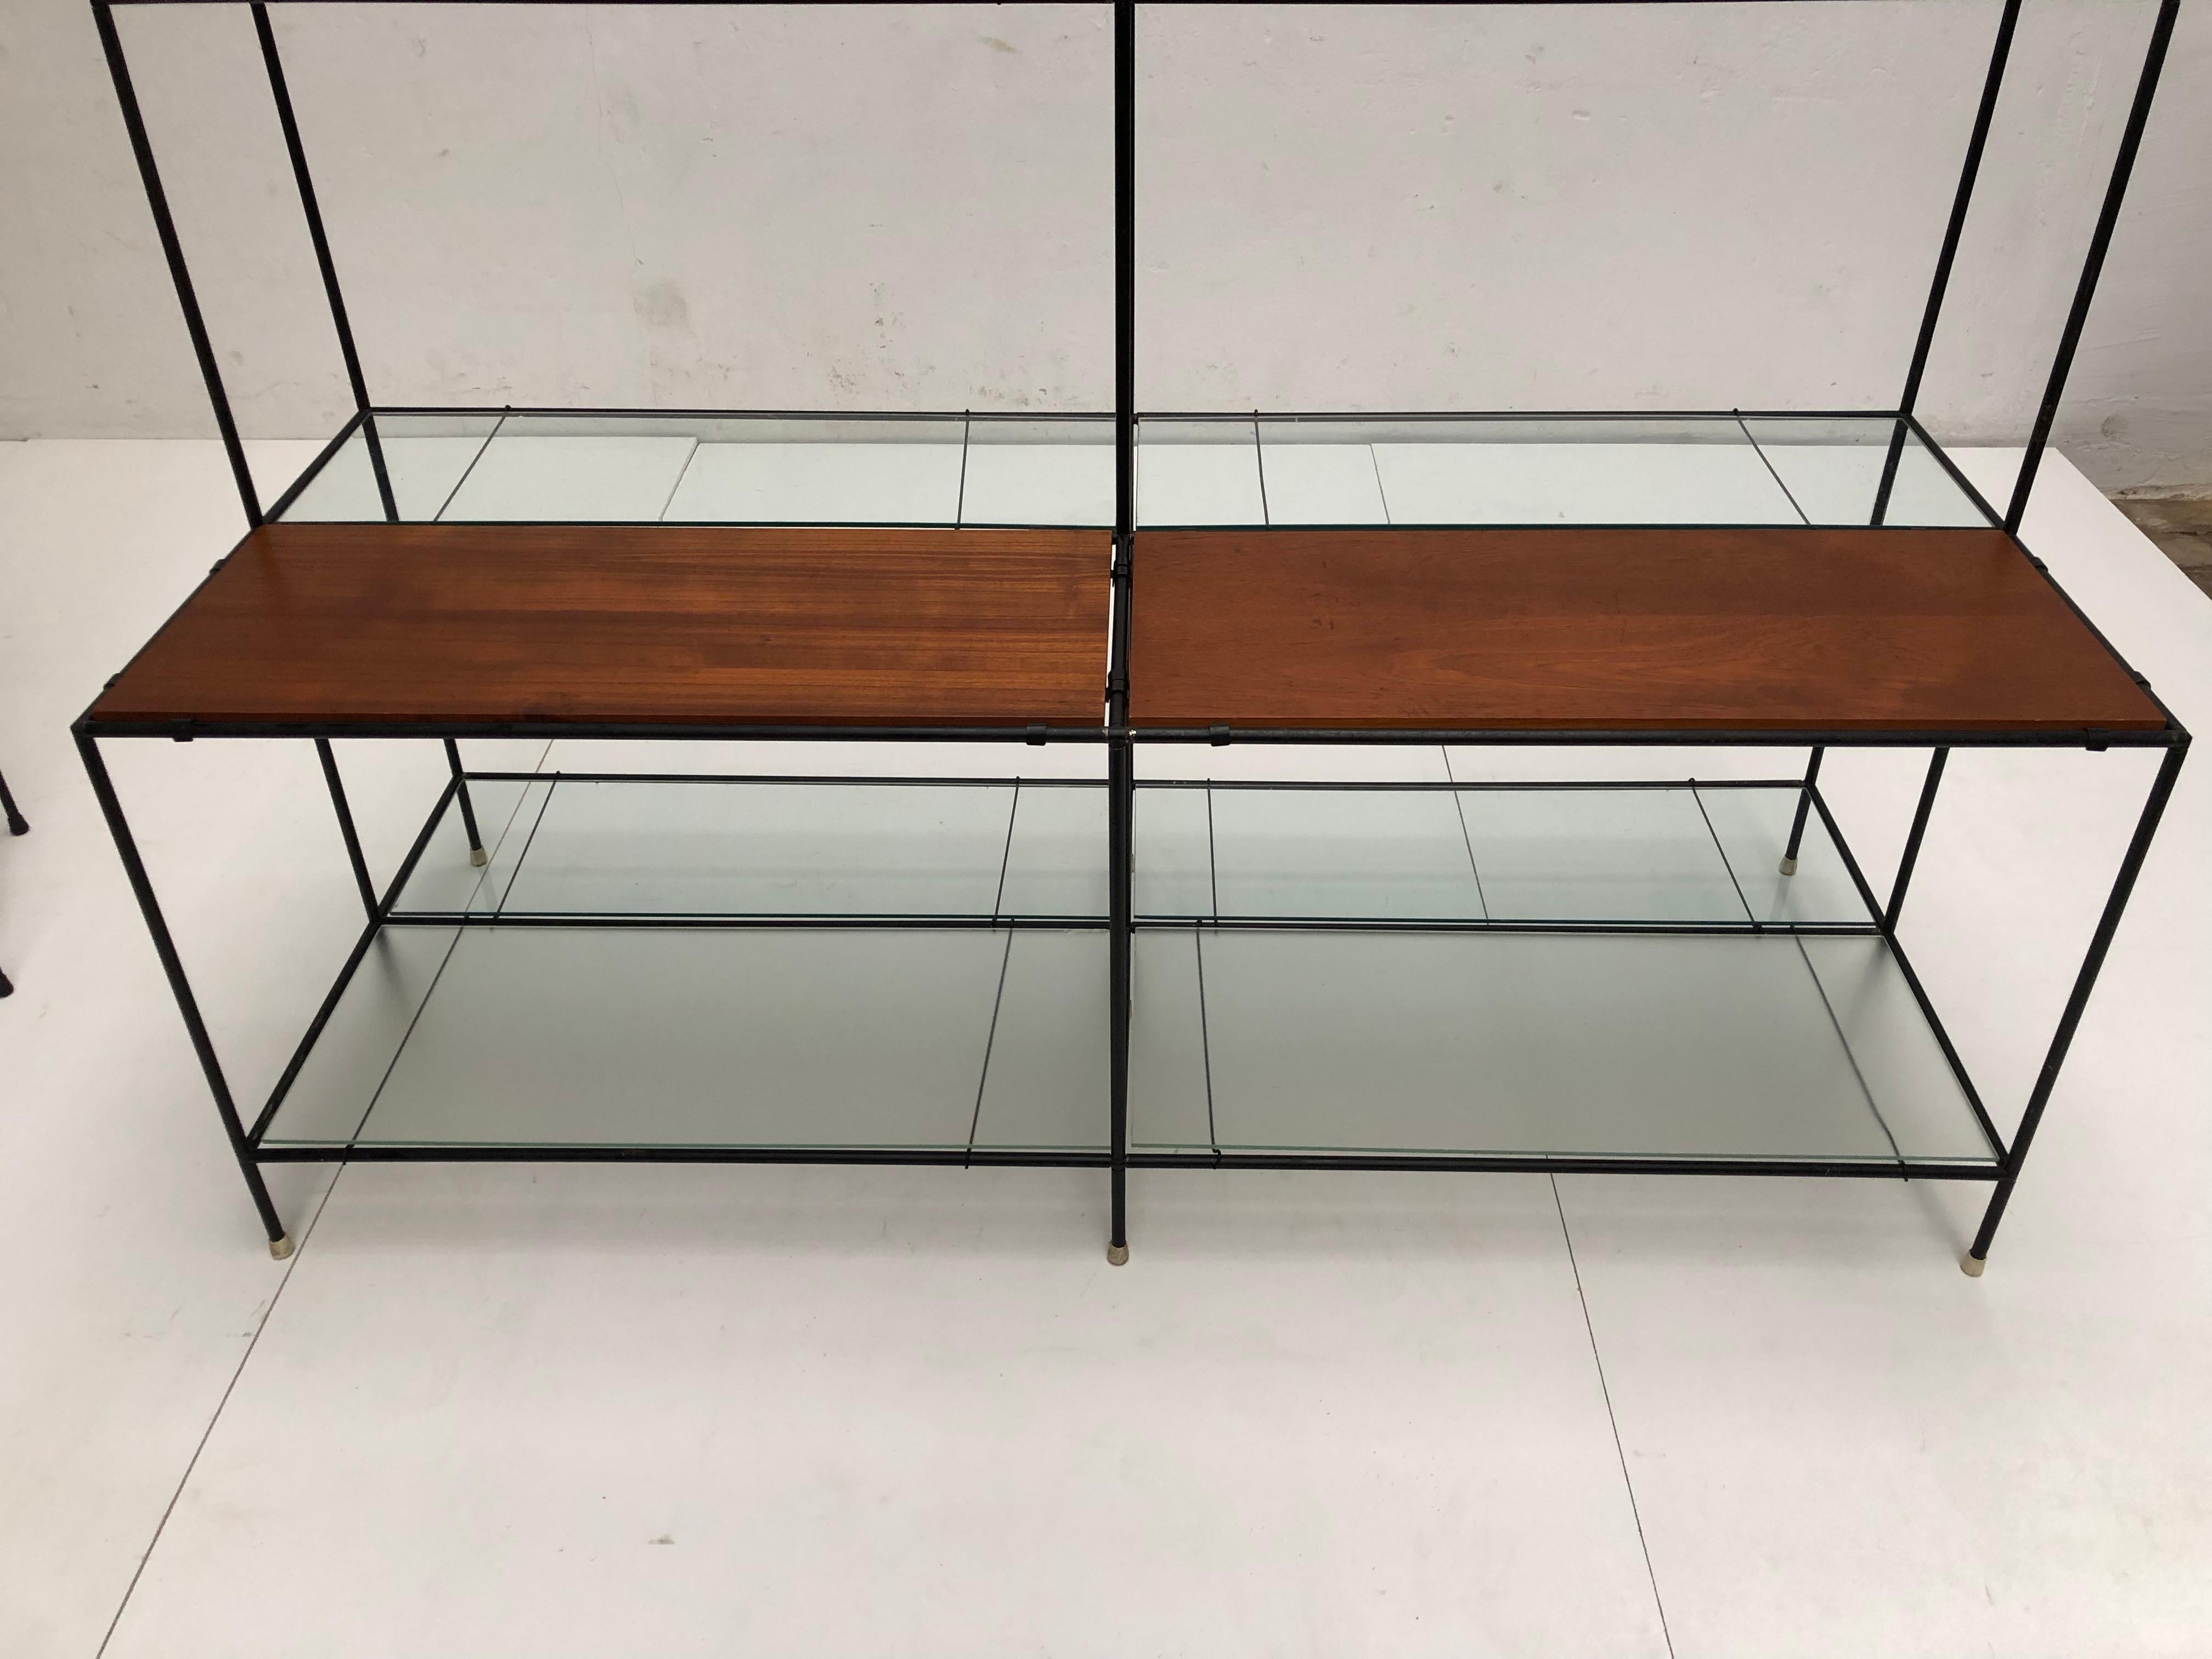 Poul Cadovius 'Abstracta' Metal, Teak, Glass Modular Display Unit, Denmark 1960 In Good Condition For Sale In bergen op zoom, NL